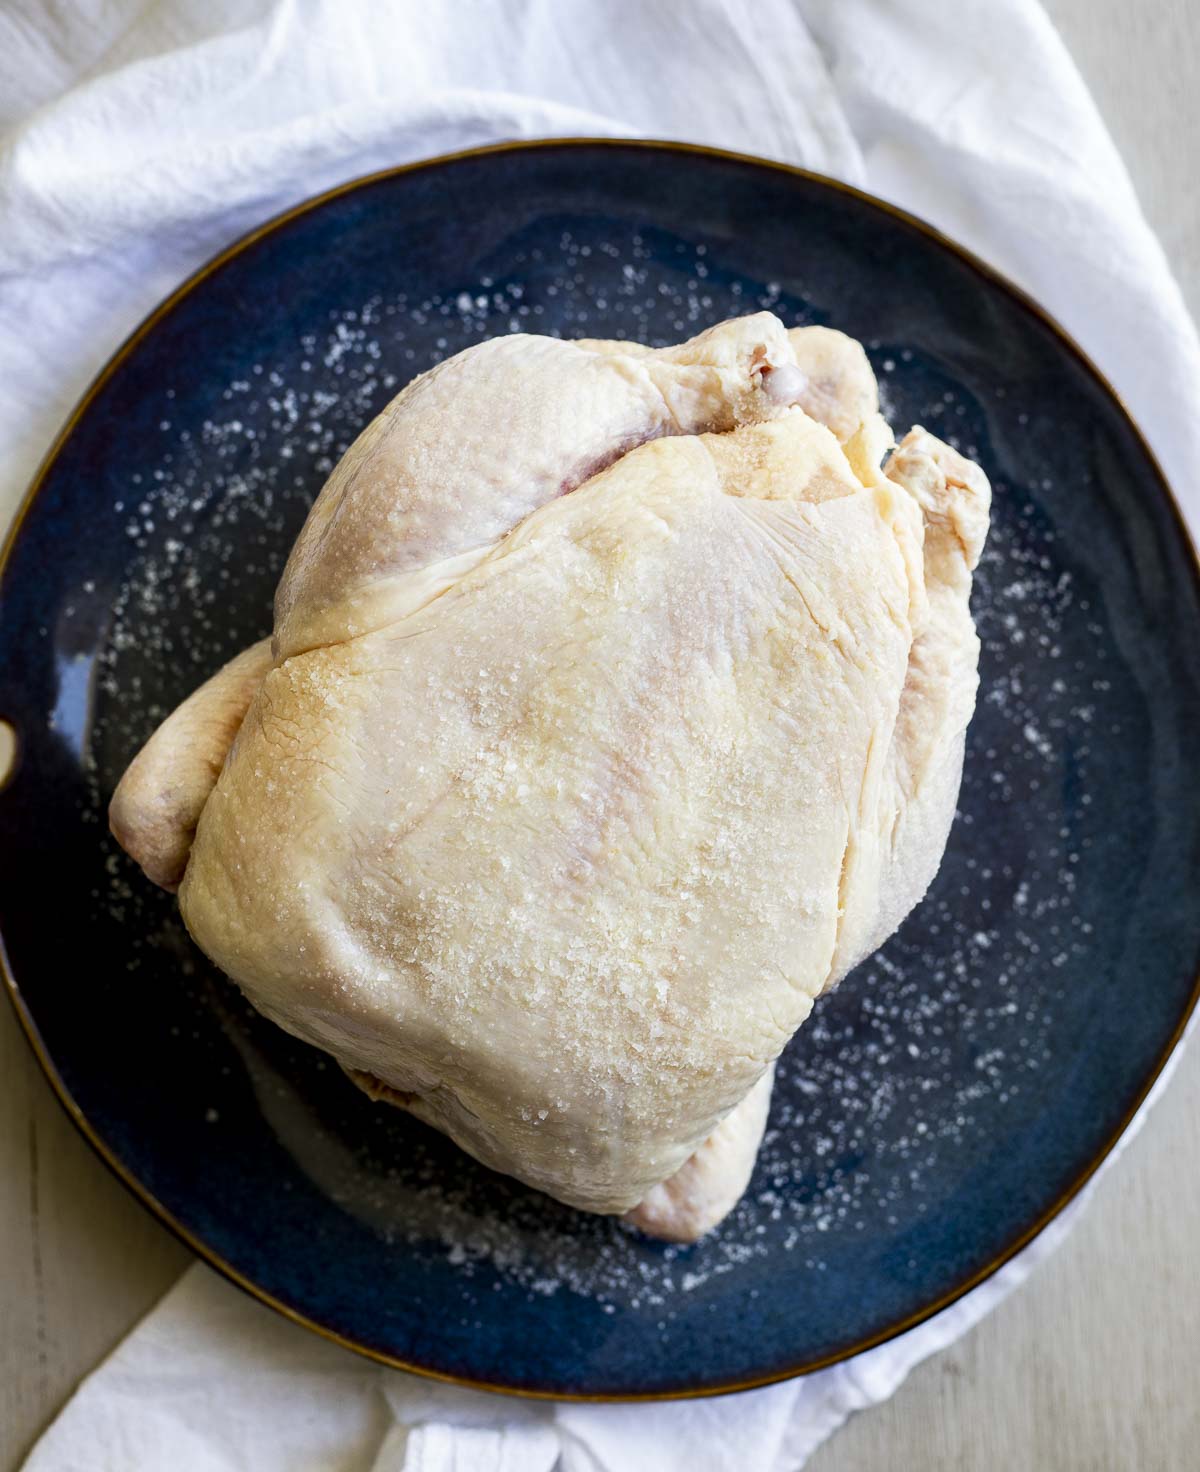 Raw whole chicken on a plate rubbed with salt.